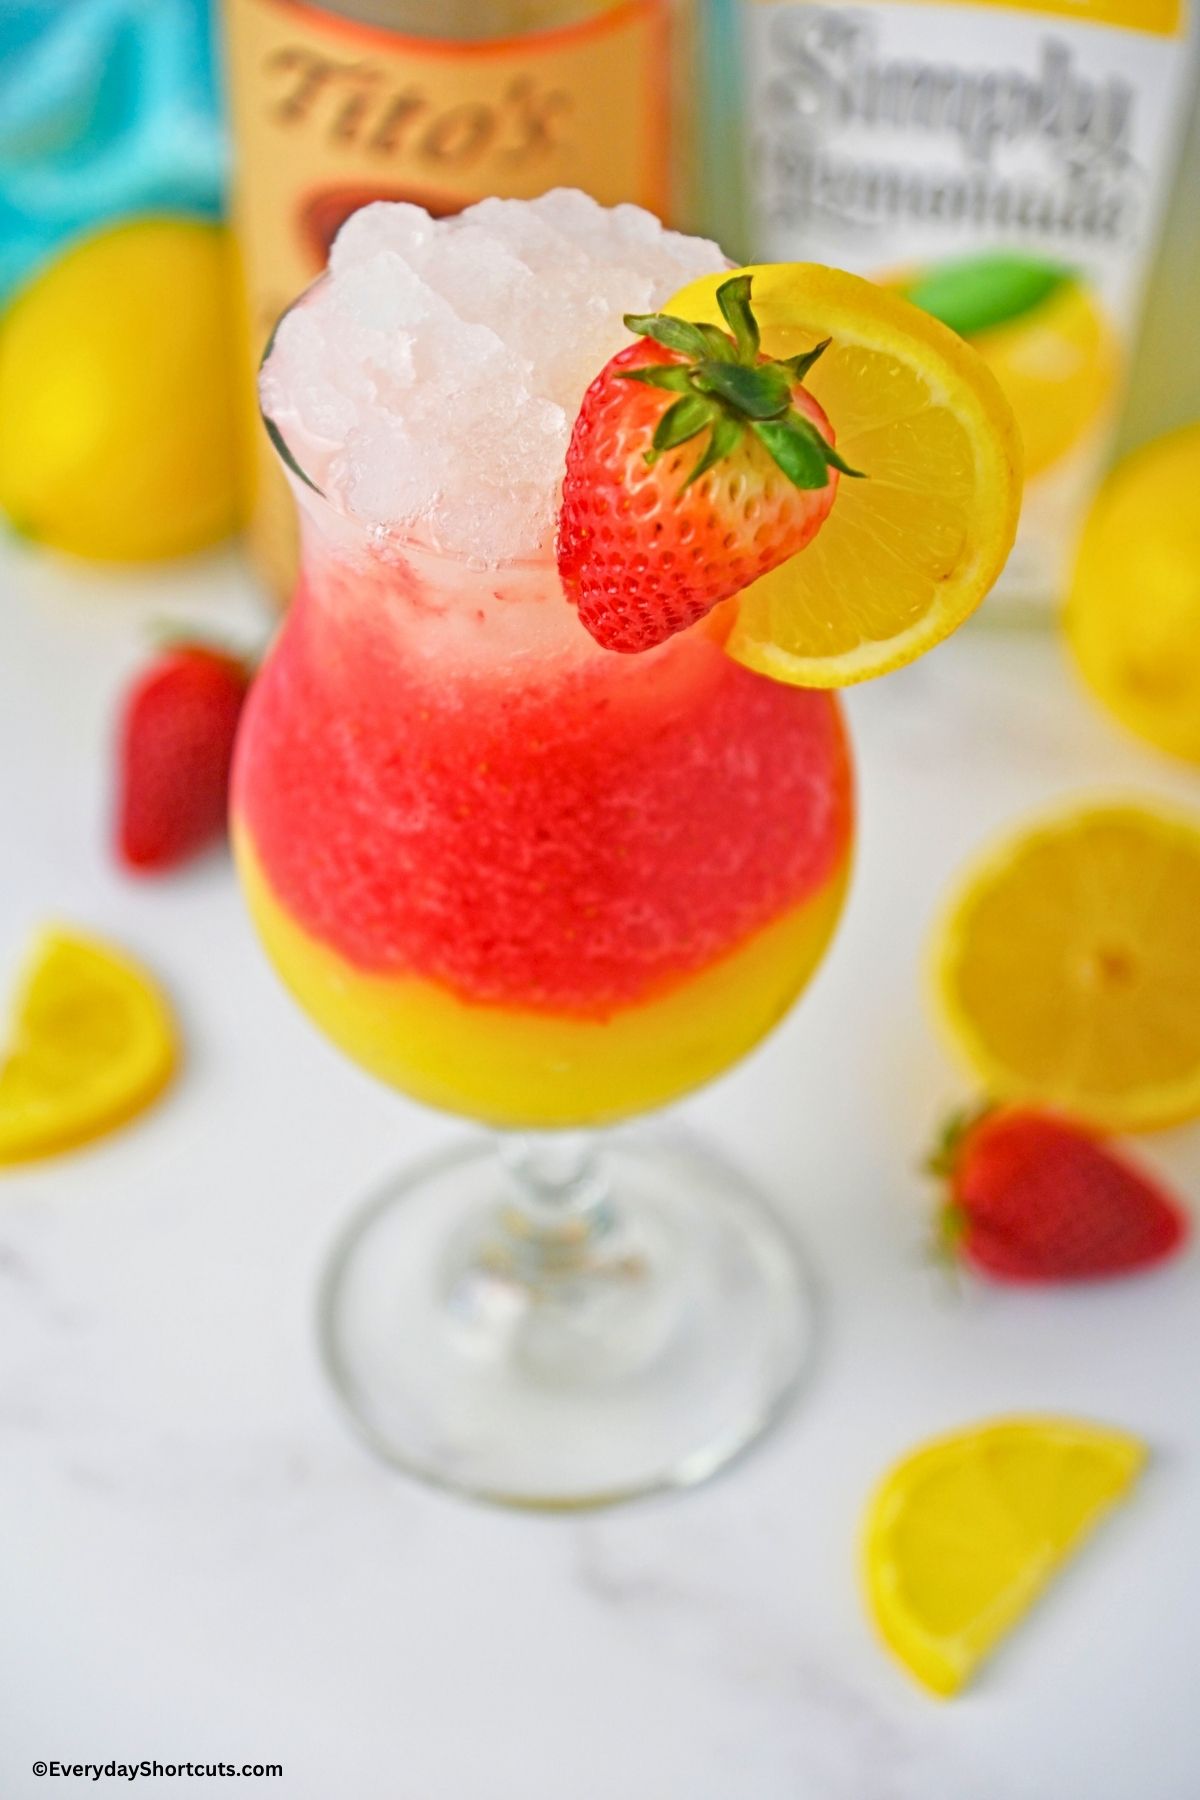 spiked ombre lemonade layered in a glass with a strawberry and lemon slice garnish